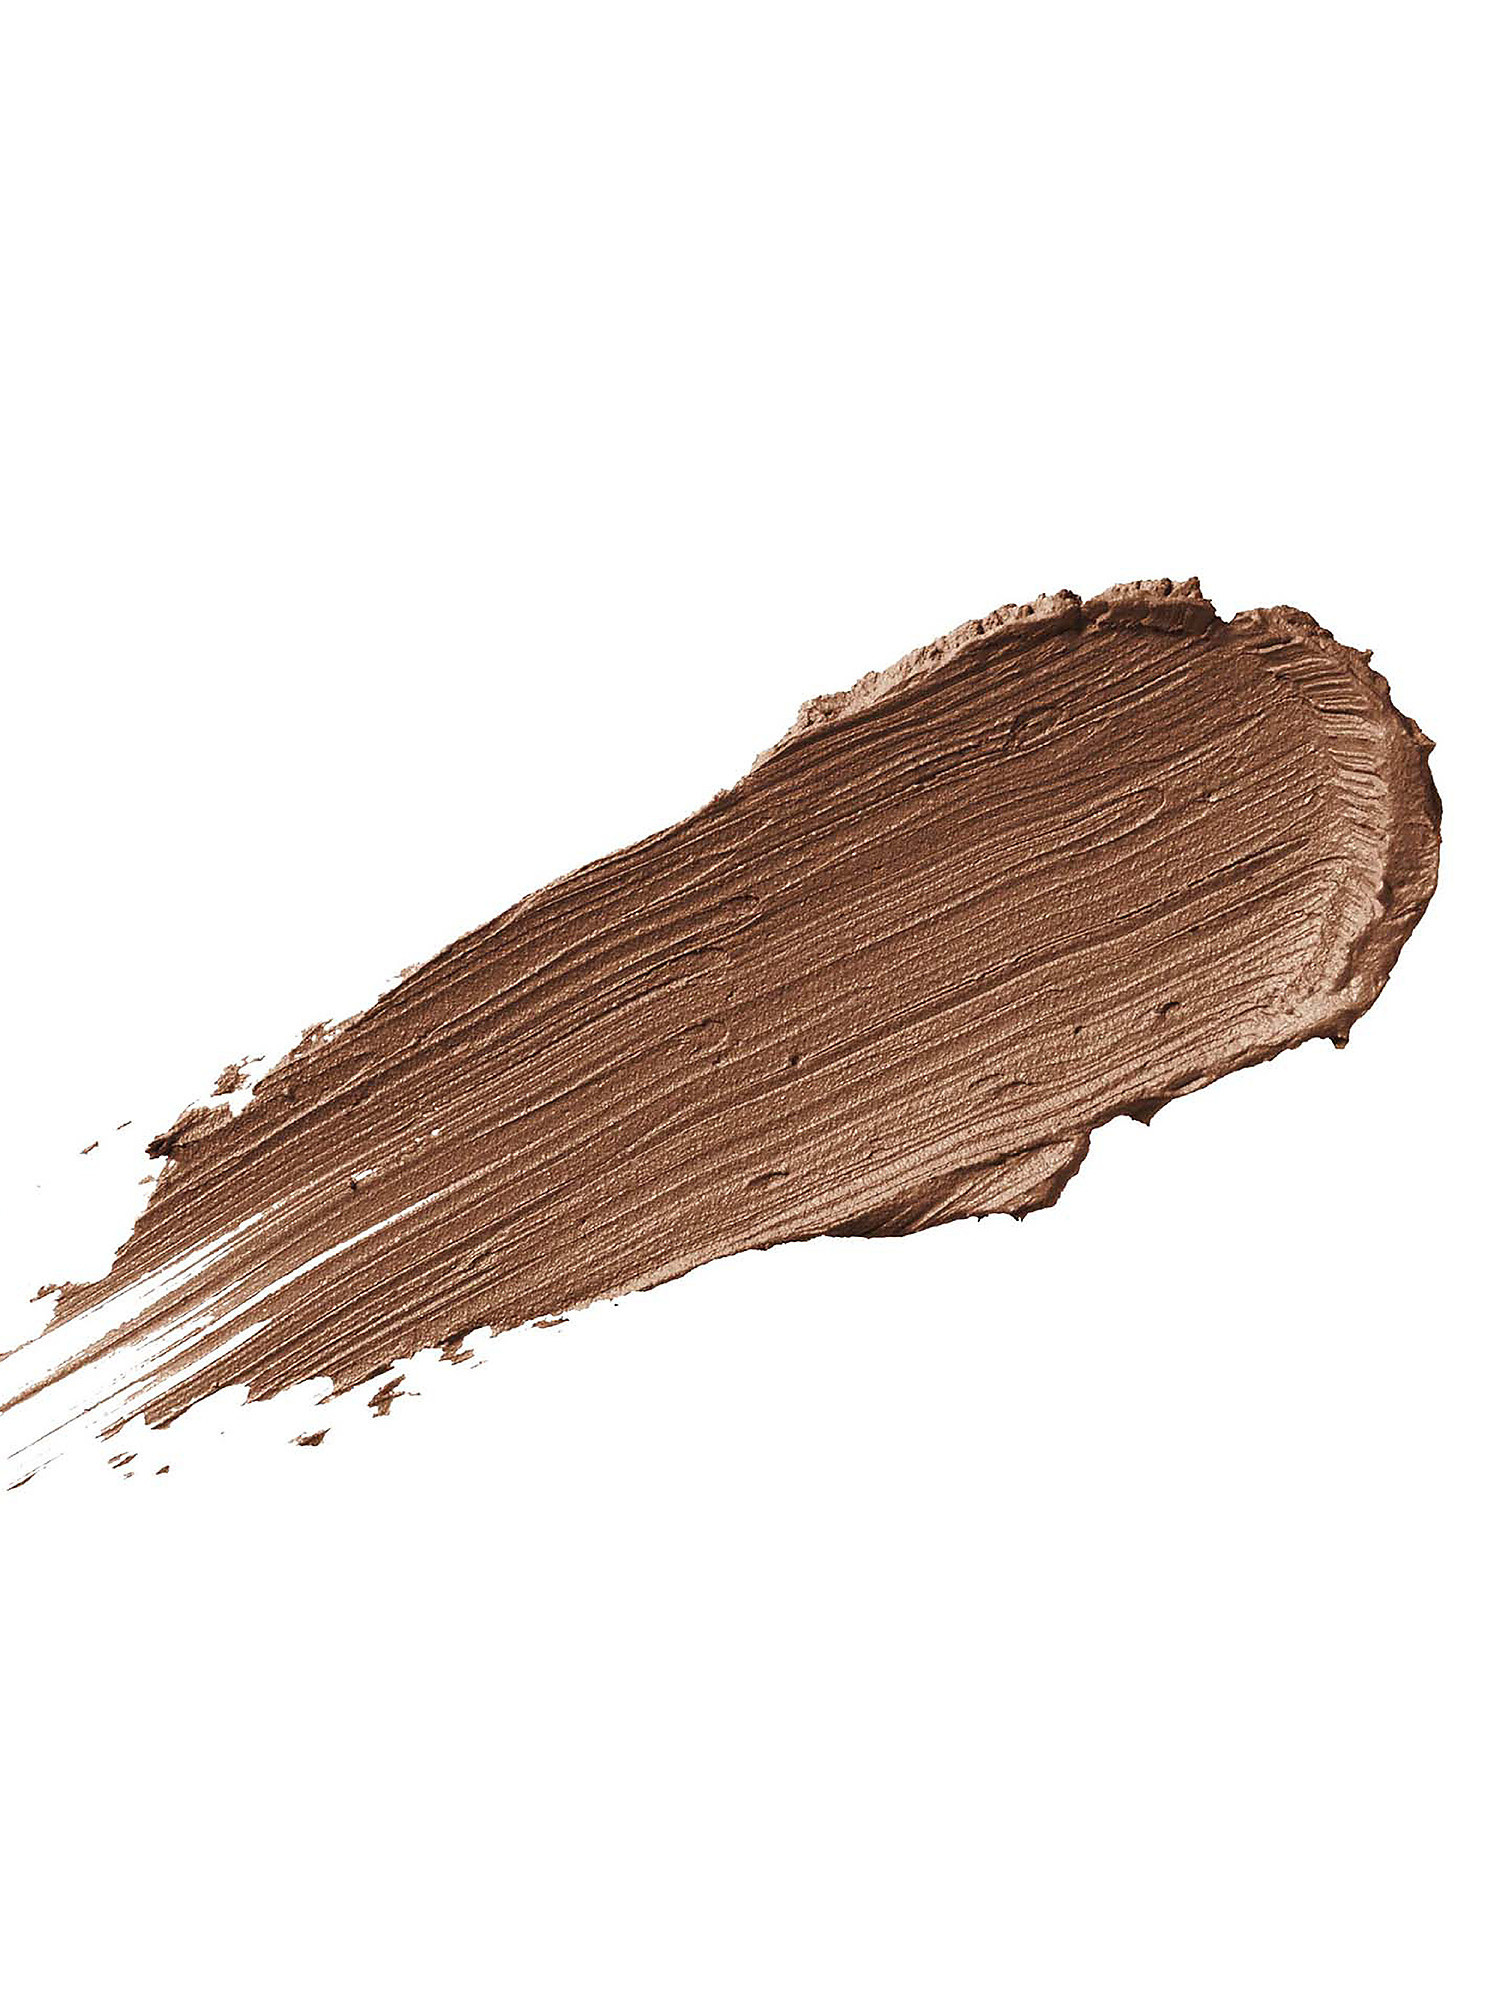 Waterproof Eyebrow Liner Cream - 02 warm taupe, Taupe Grey, large image number 2